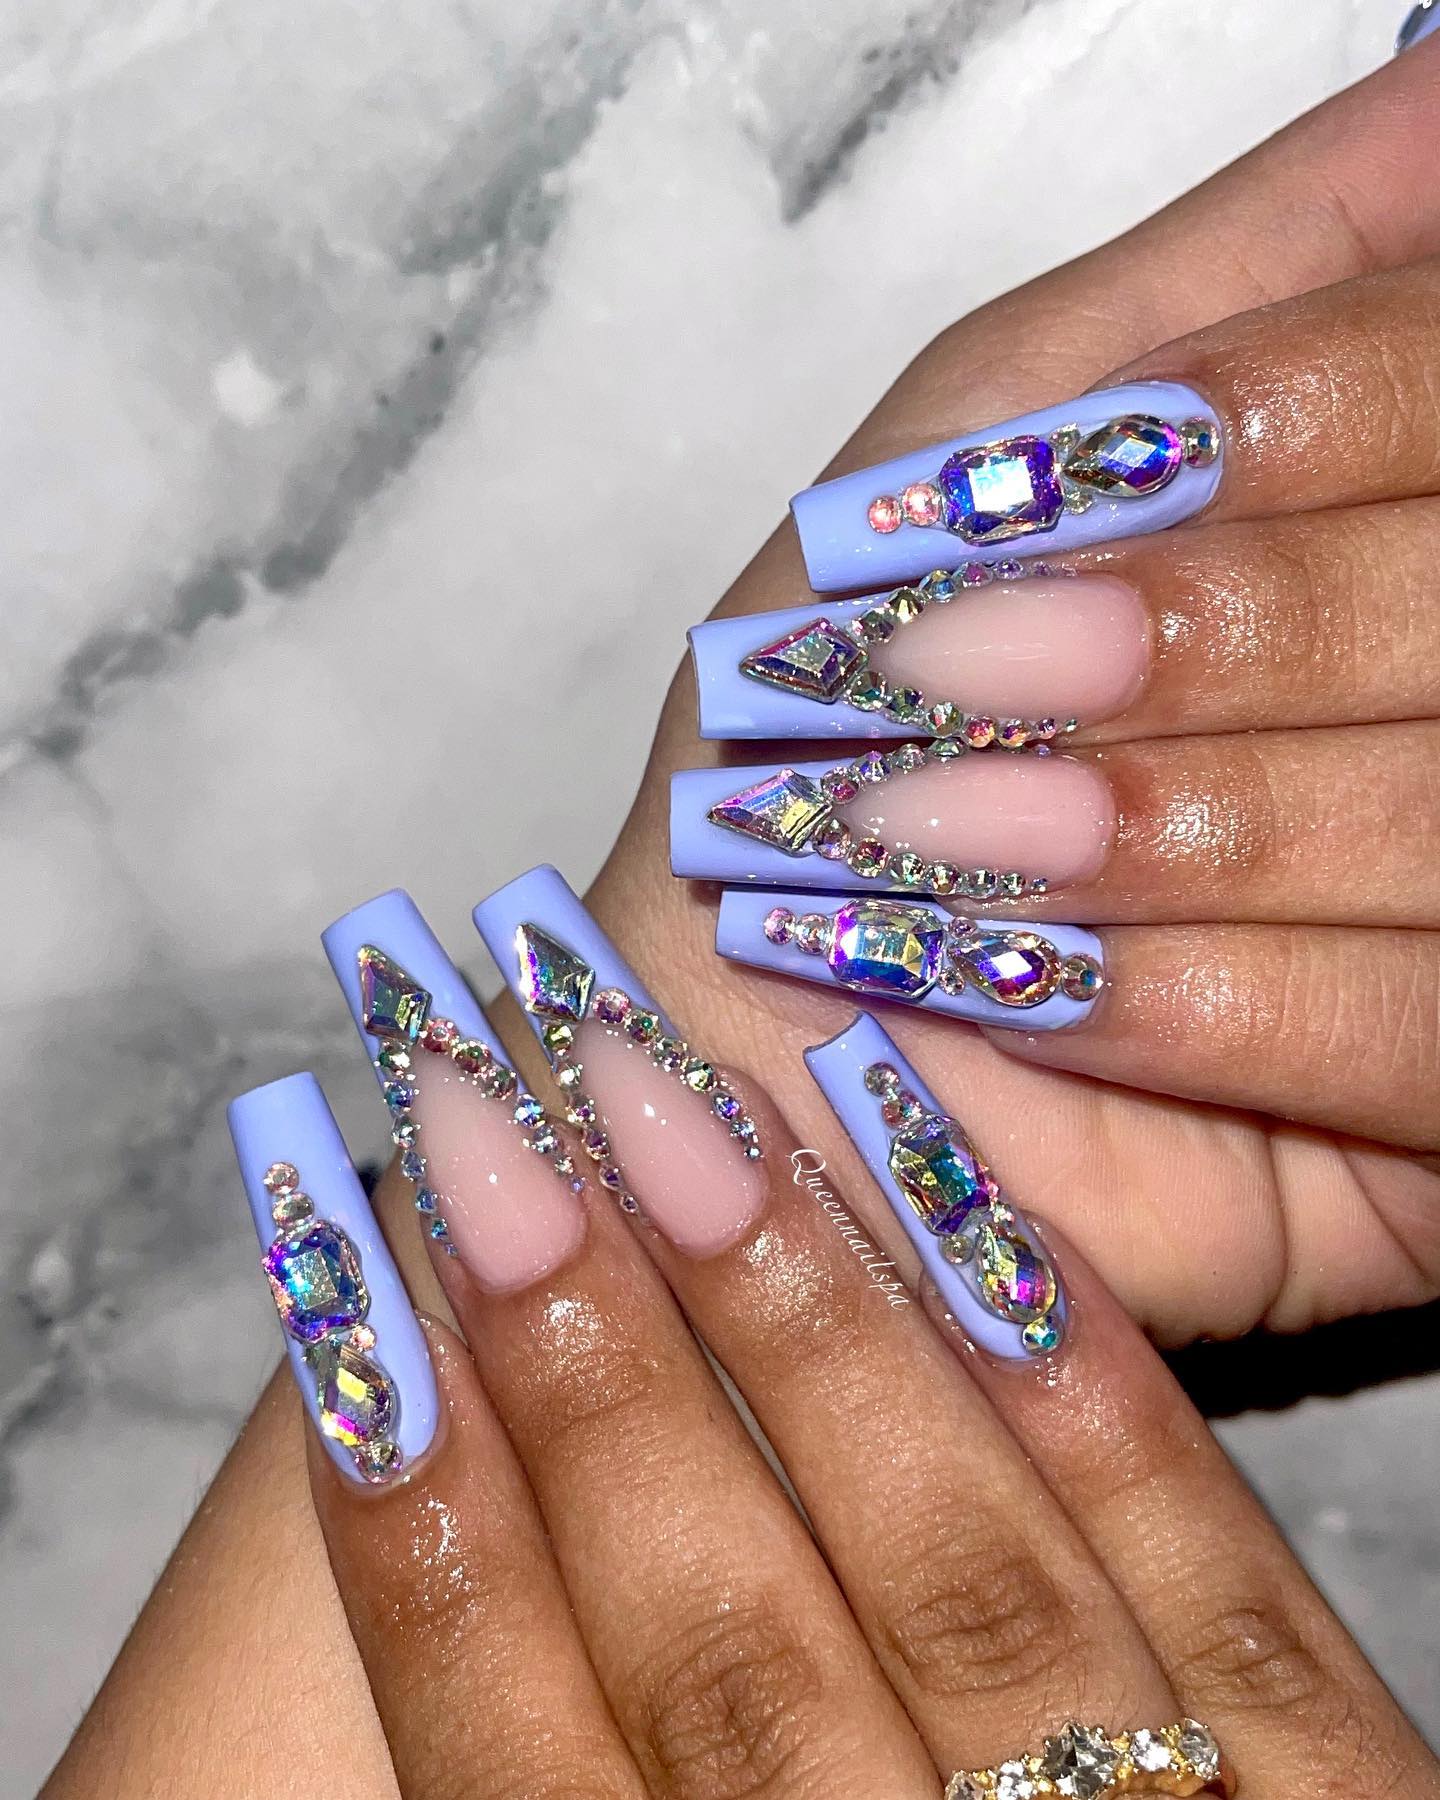 Lavender Coffin Nails With Swovoski And Rhinestones